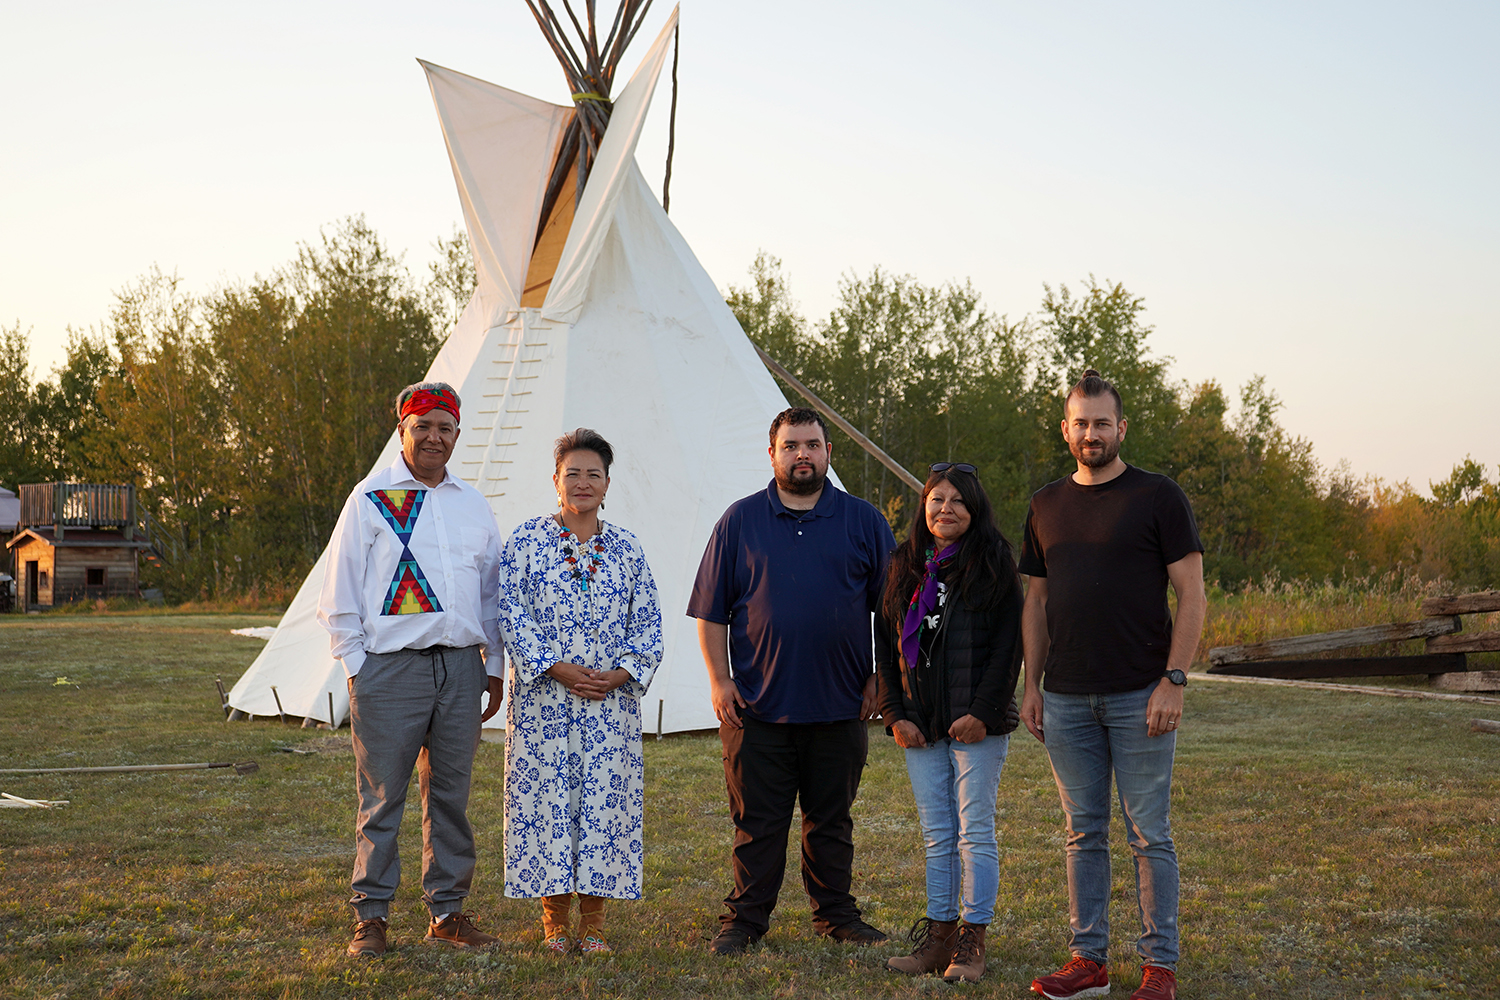 Researchers from Onion Lake Cree Nation, Ralph Morin and Dolores Pahtayken (left), stand with researchers from Pewaseskwan (the Indigenous Wellness Research Group), Jarrett Crowe (centre), Anne Mease (second from the right), and Luke Heidebrecht (right). (Photo by Jarrett Crowe)